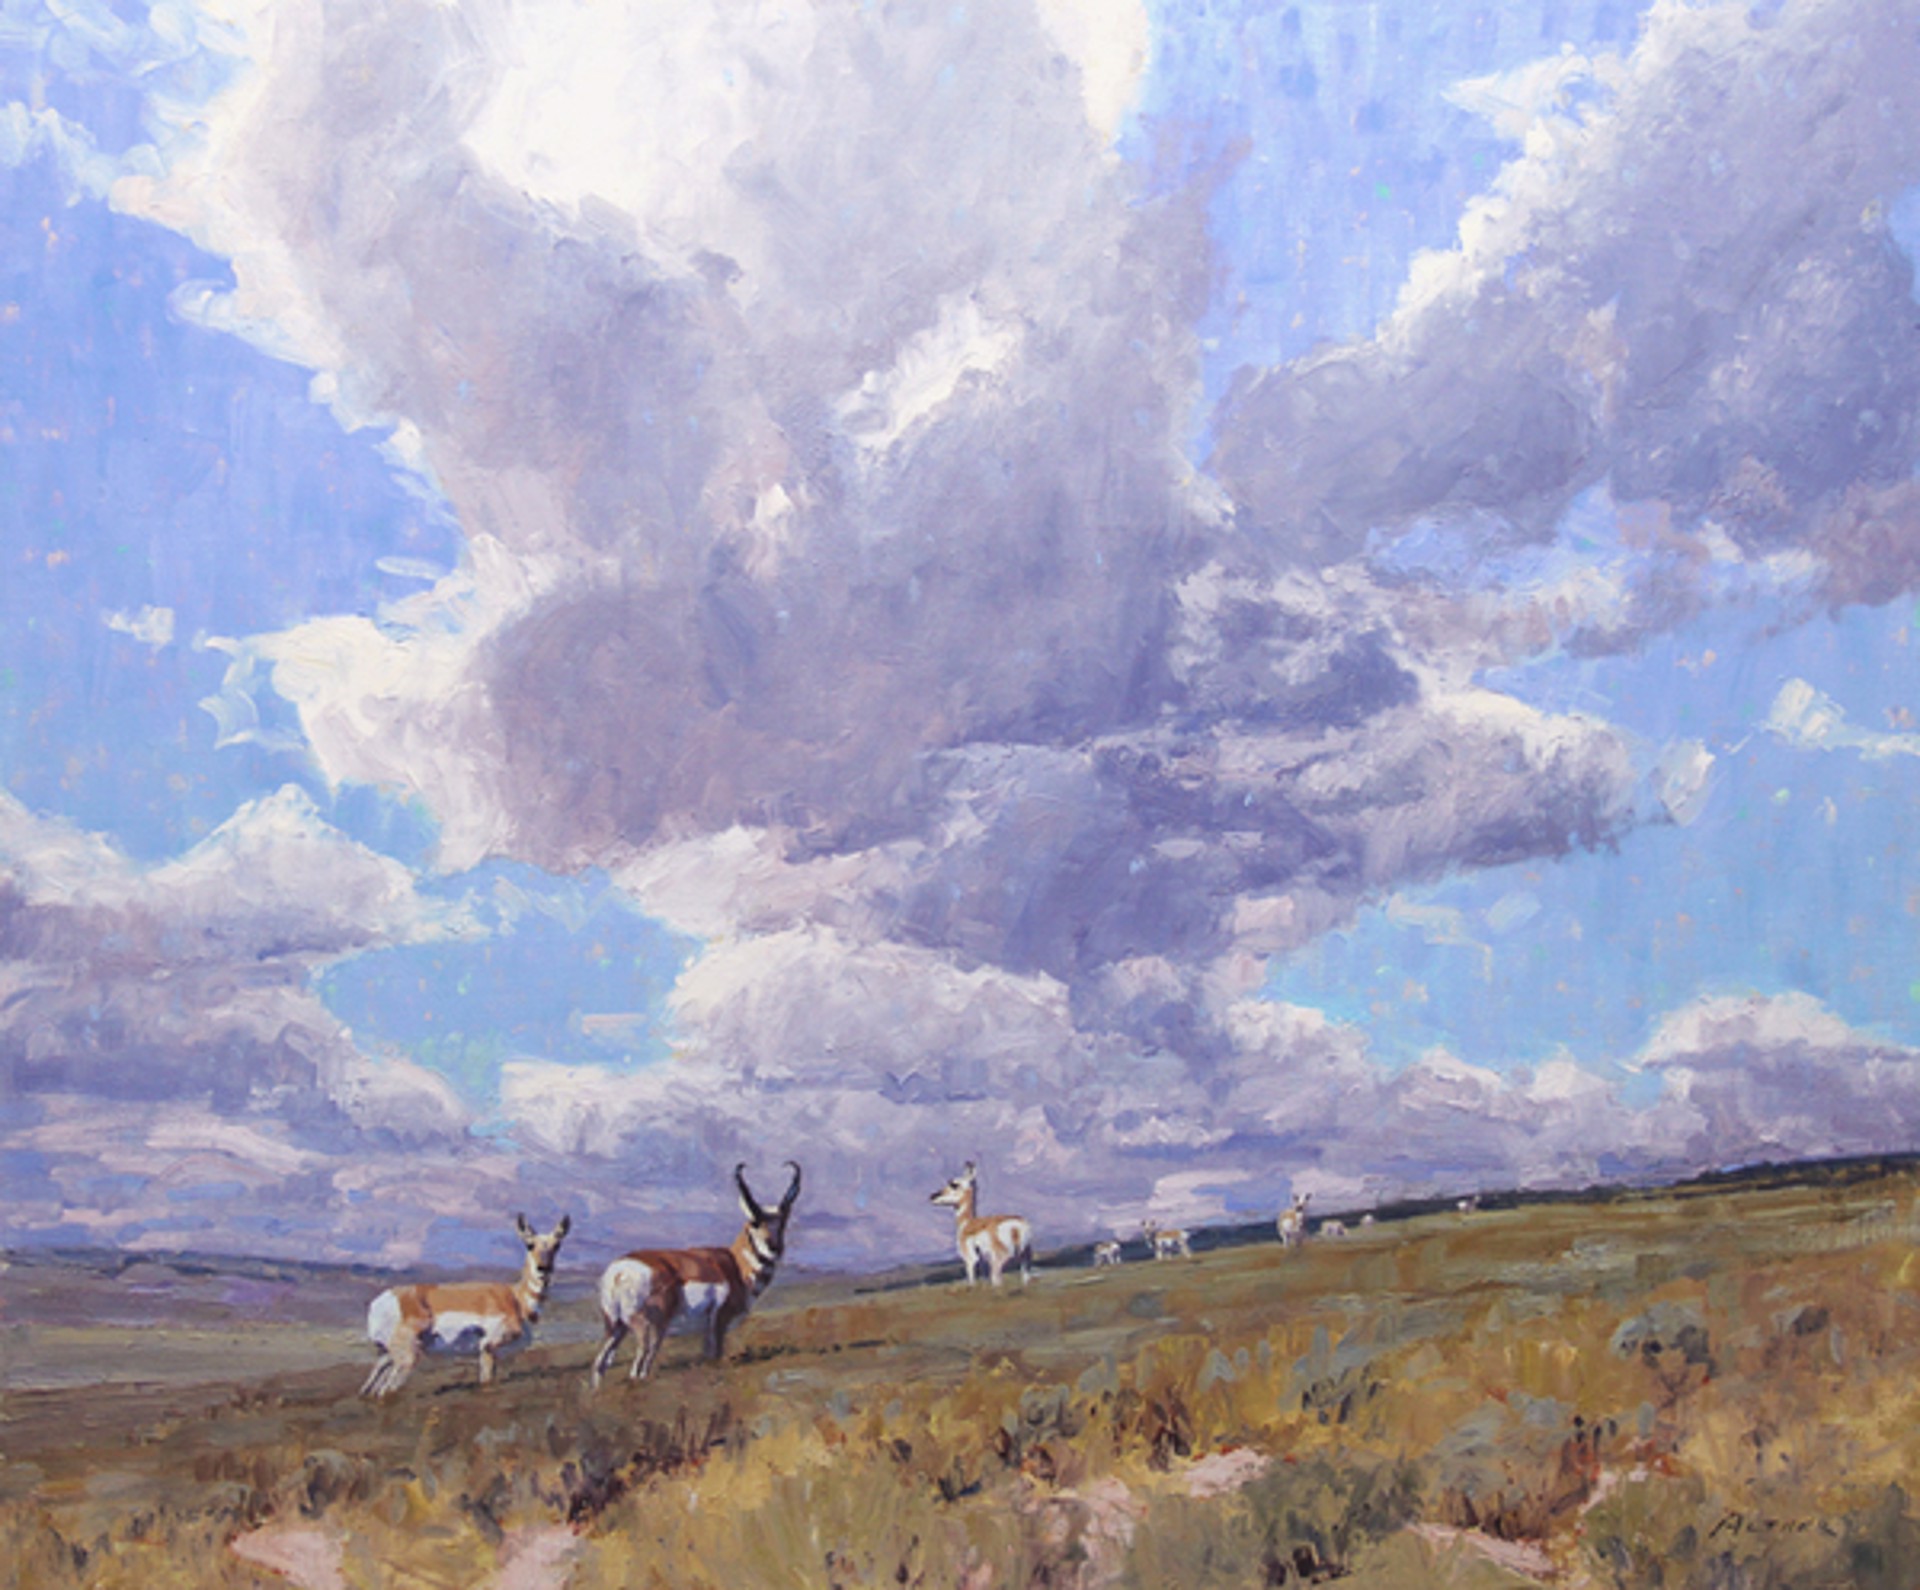 Capricious Skies (Antelope) by William Alther